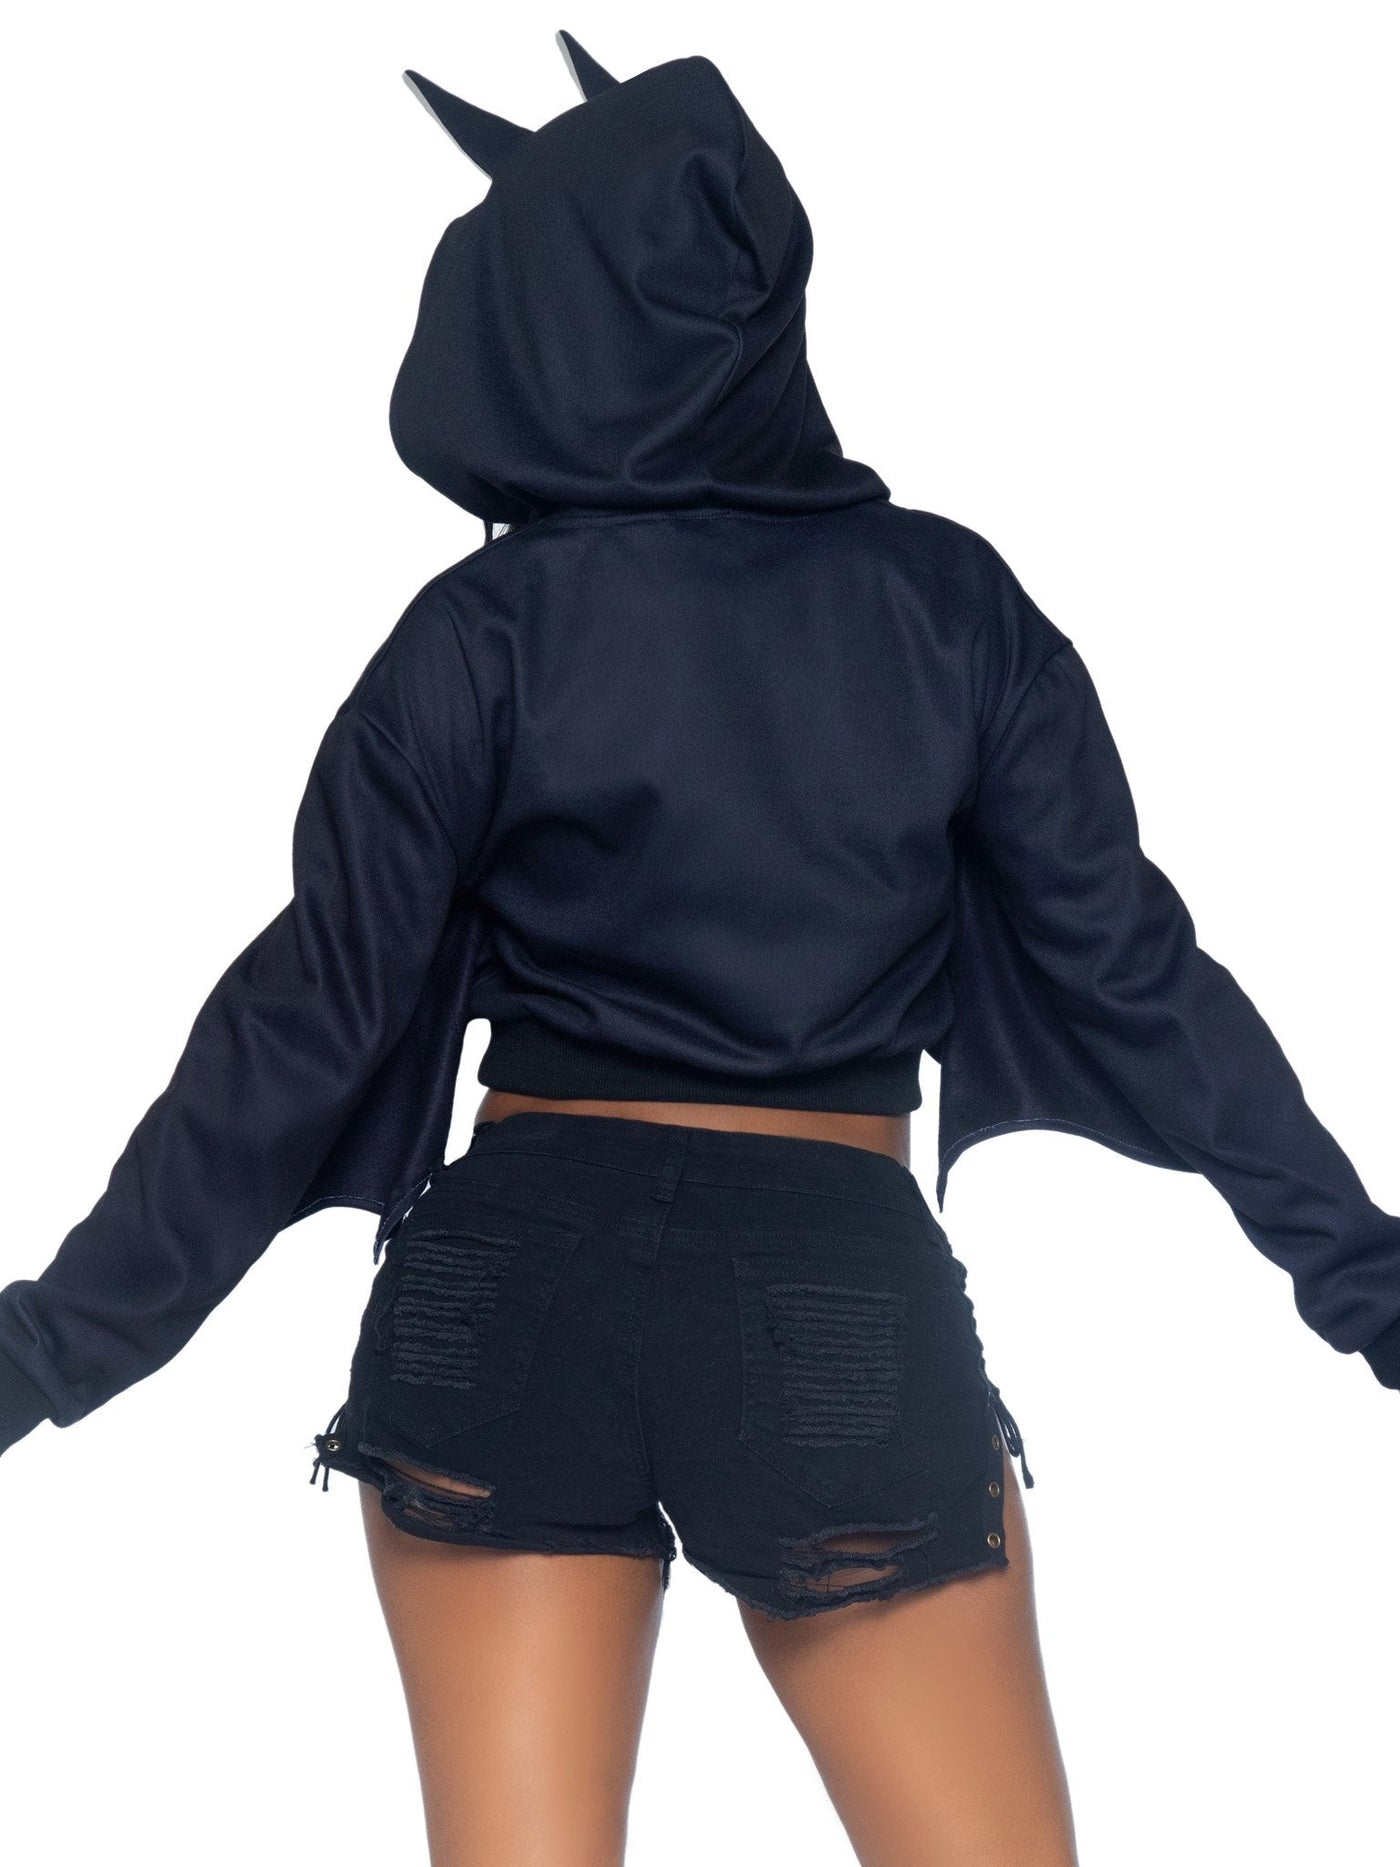 Bat Cropped Hoodie Costume - JJ's Party House